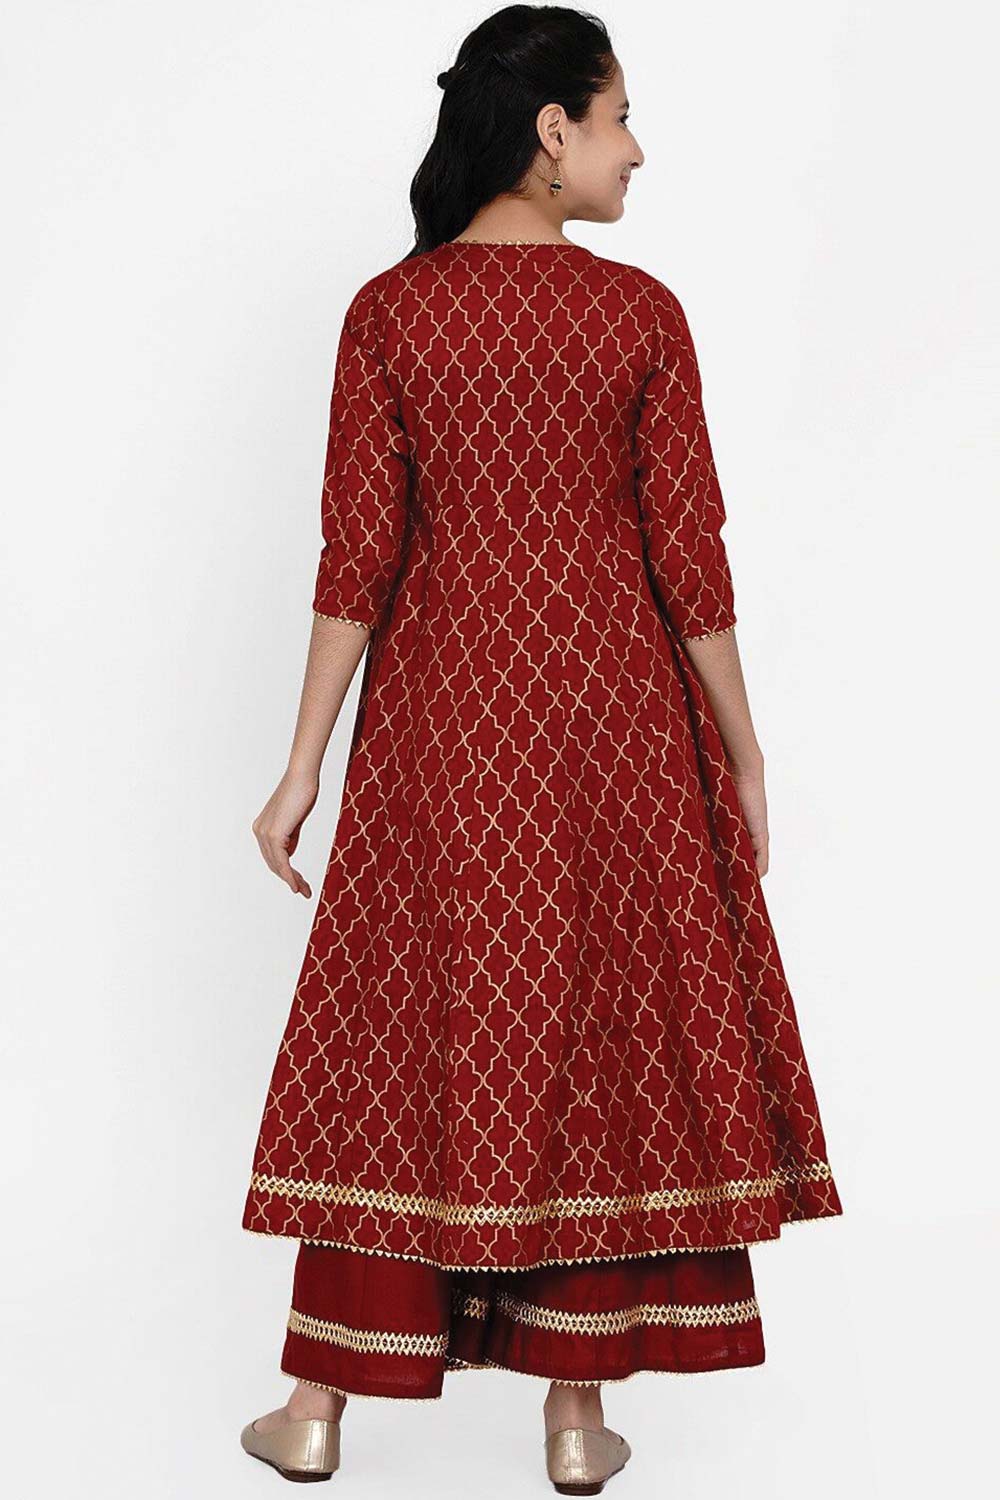 Buy Girl's Maroon And Gold Ethnic Motifs Foil Print Anarkali Kurta With Palazzos Online - Back